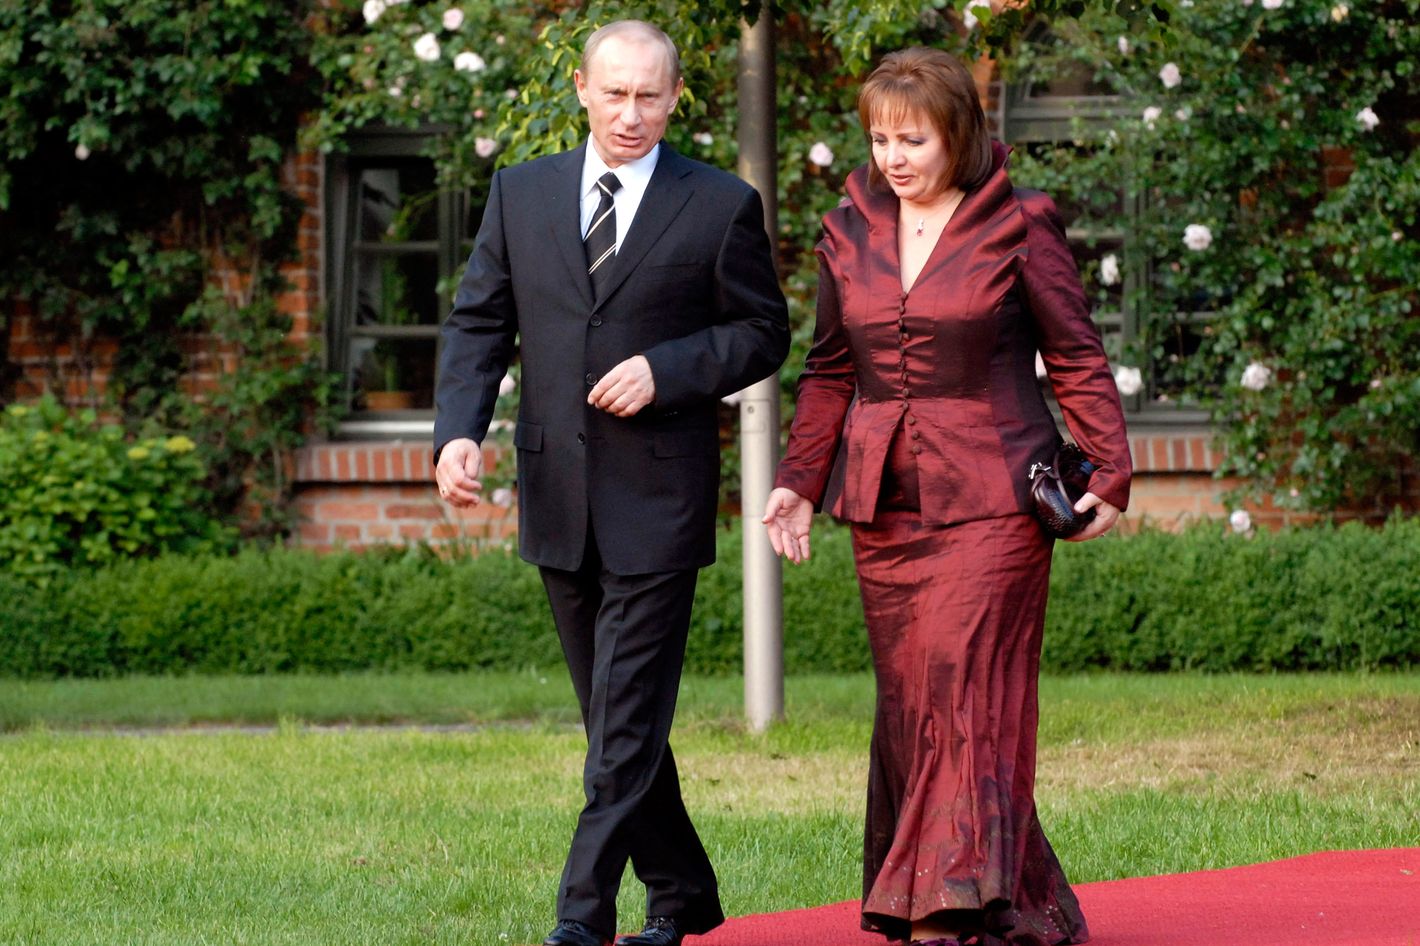 5 Photos Of Vladimir Putin And His Wife Looking Miserable Together 